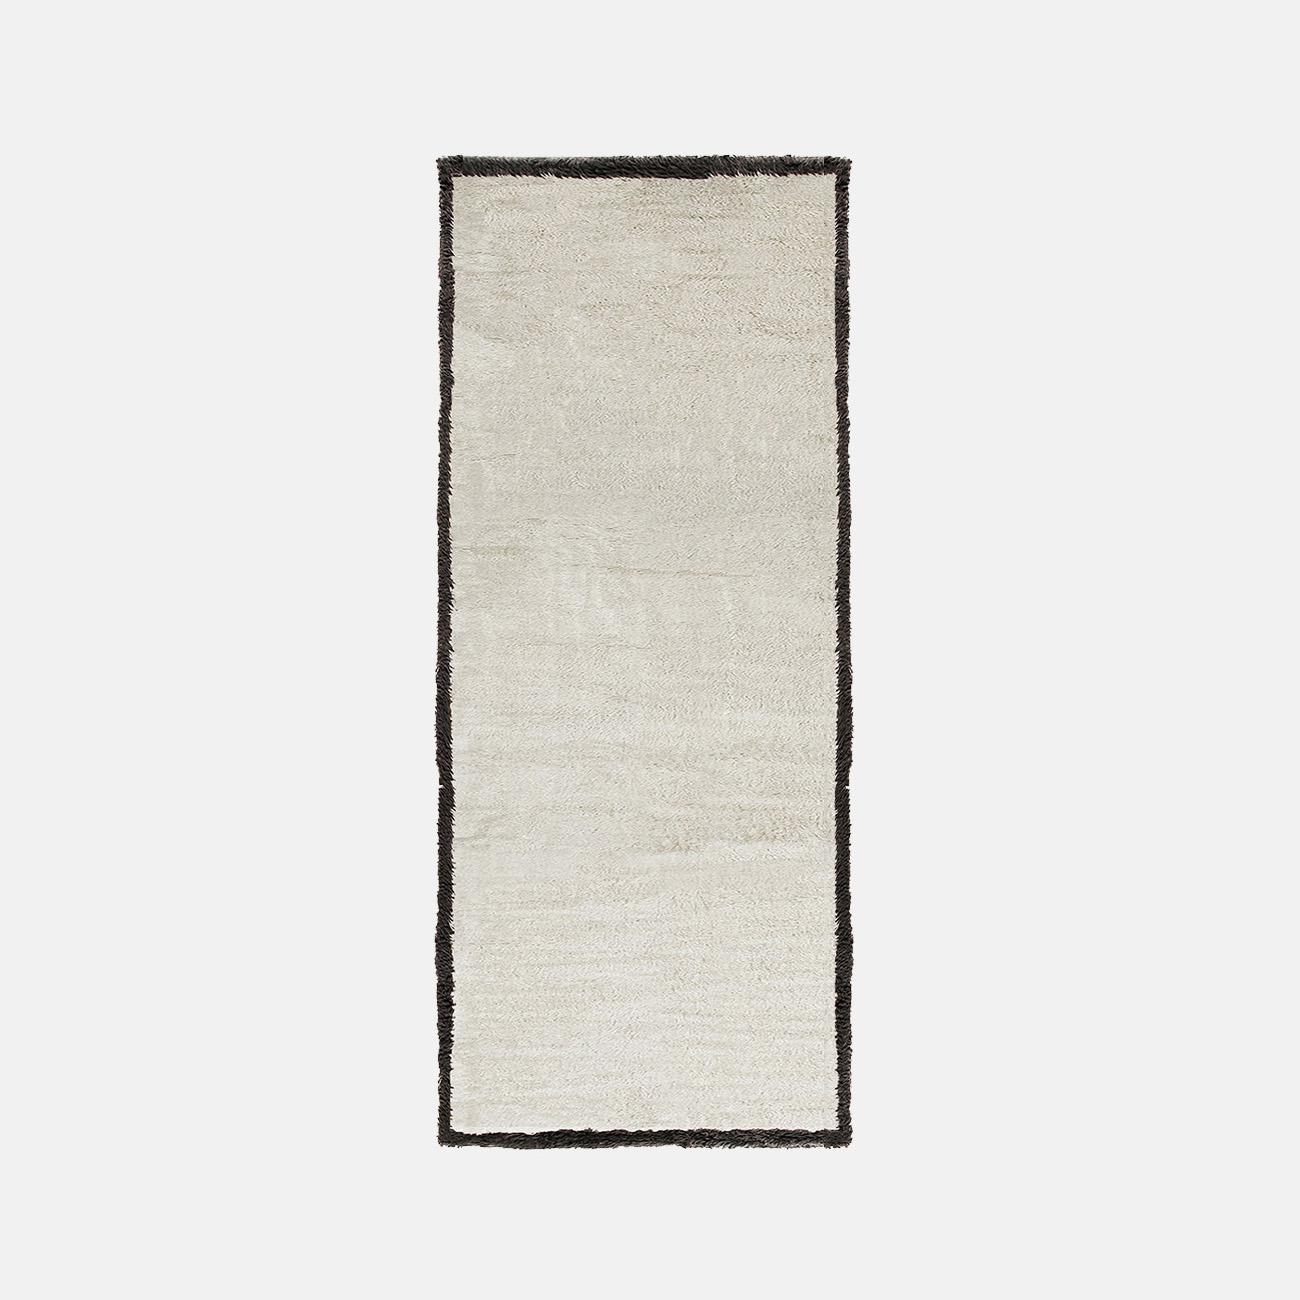 Kimoto Caru Runner Rug by Atelier Bowy C.D.
Dimensions: W 120 x L 465 cm.
Materials: Wool.

Available in W100 x L320, W110 x L350, W120 x L465 cm.

Atelier Bowy C.D. is dedicated to crafting contemporary handmade rugs for residential and contract